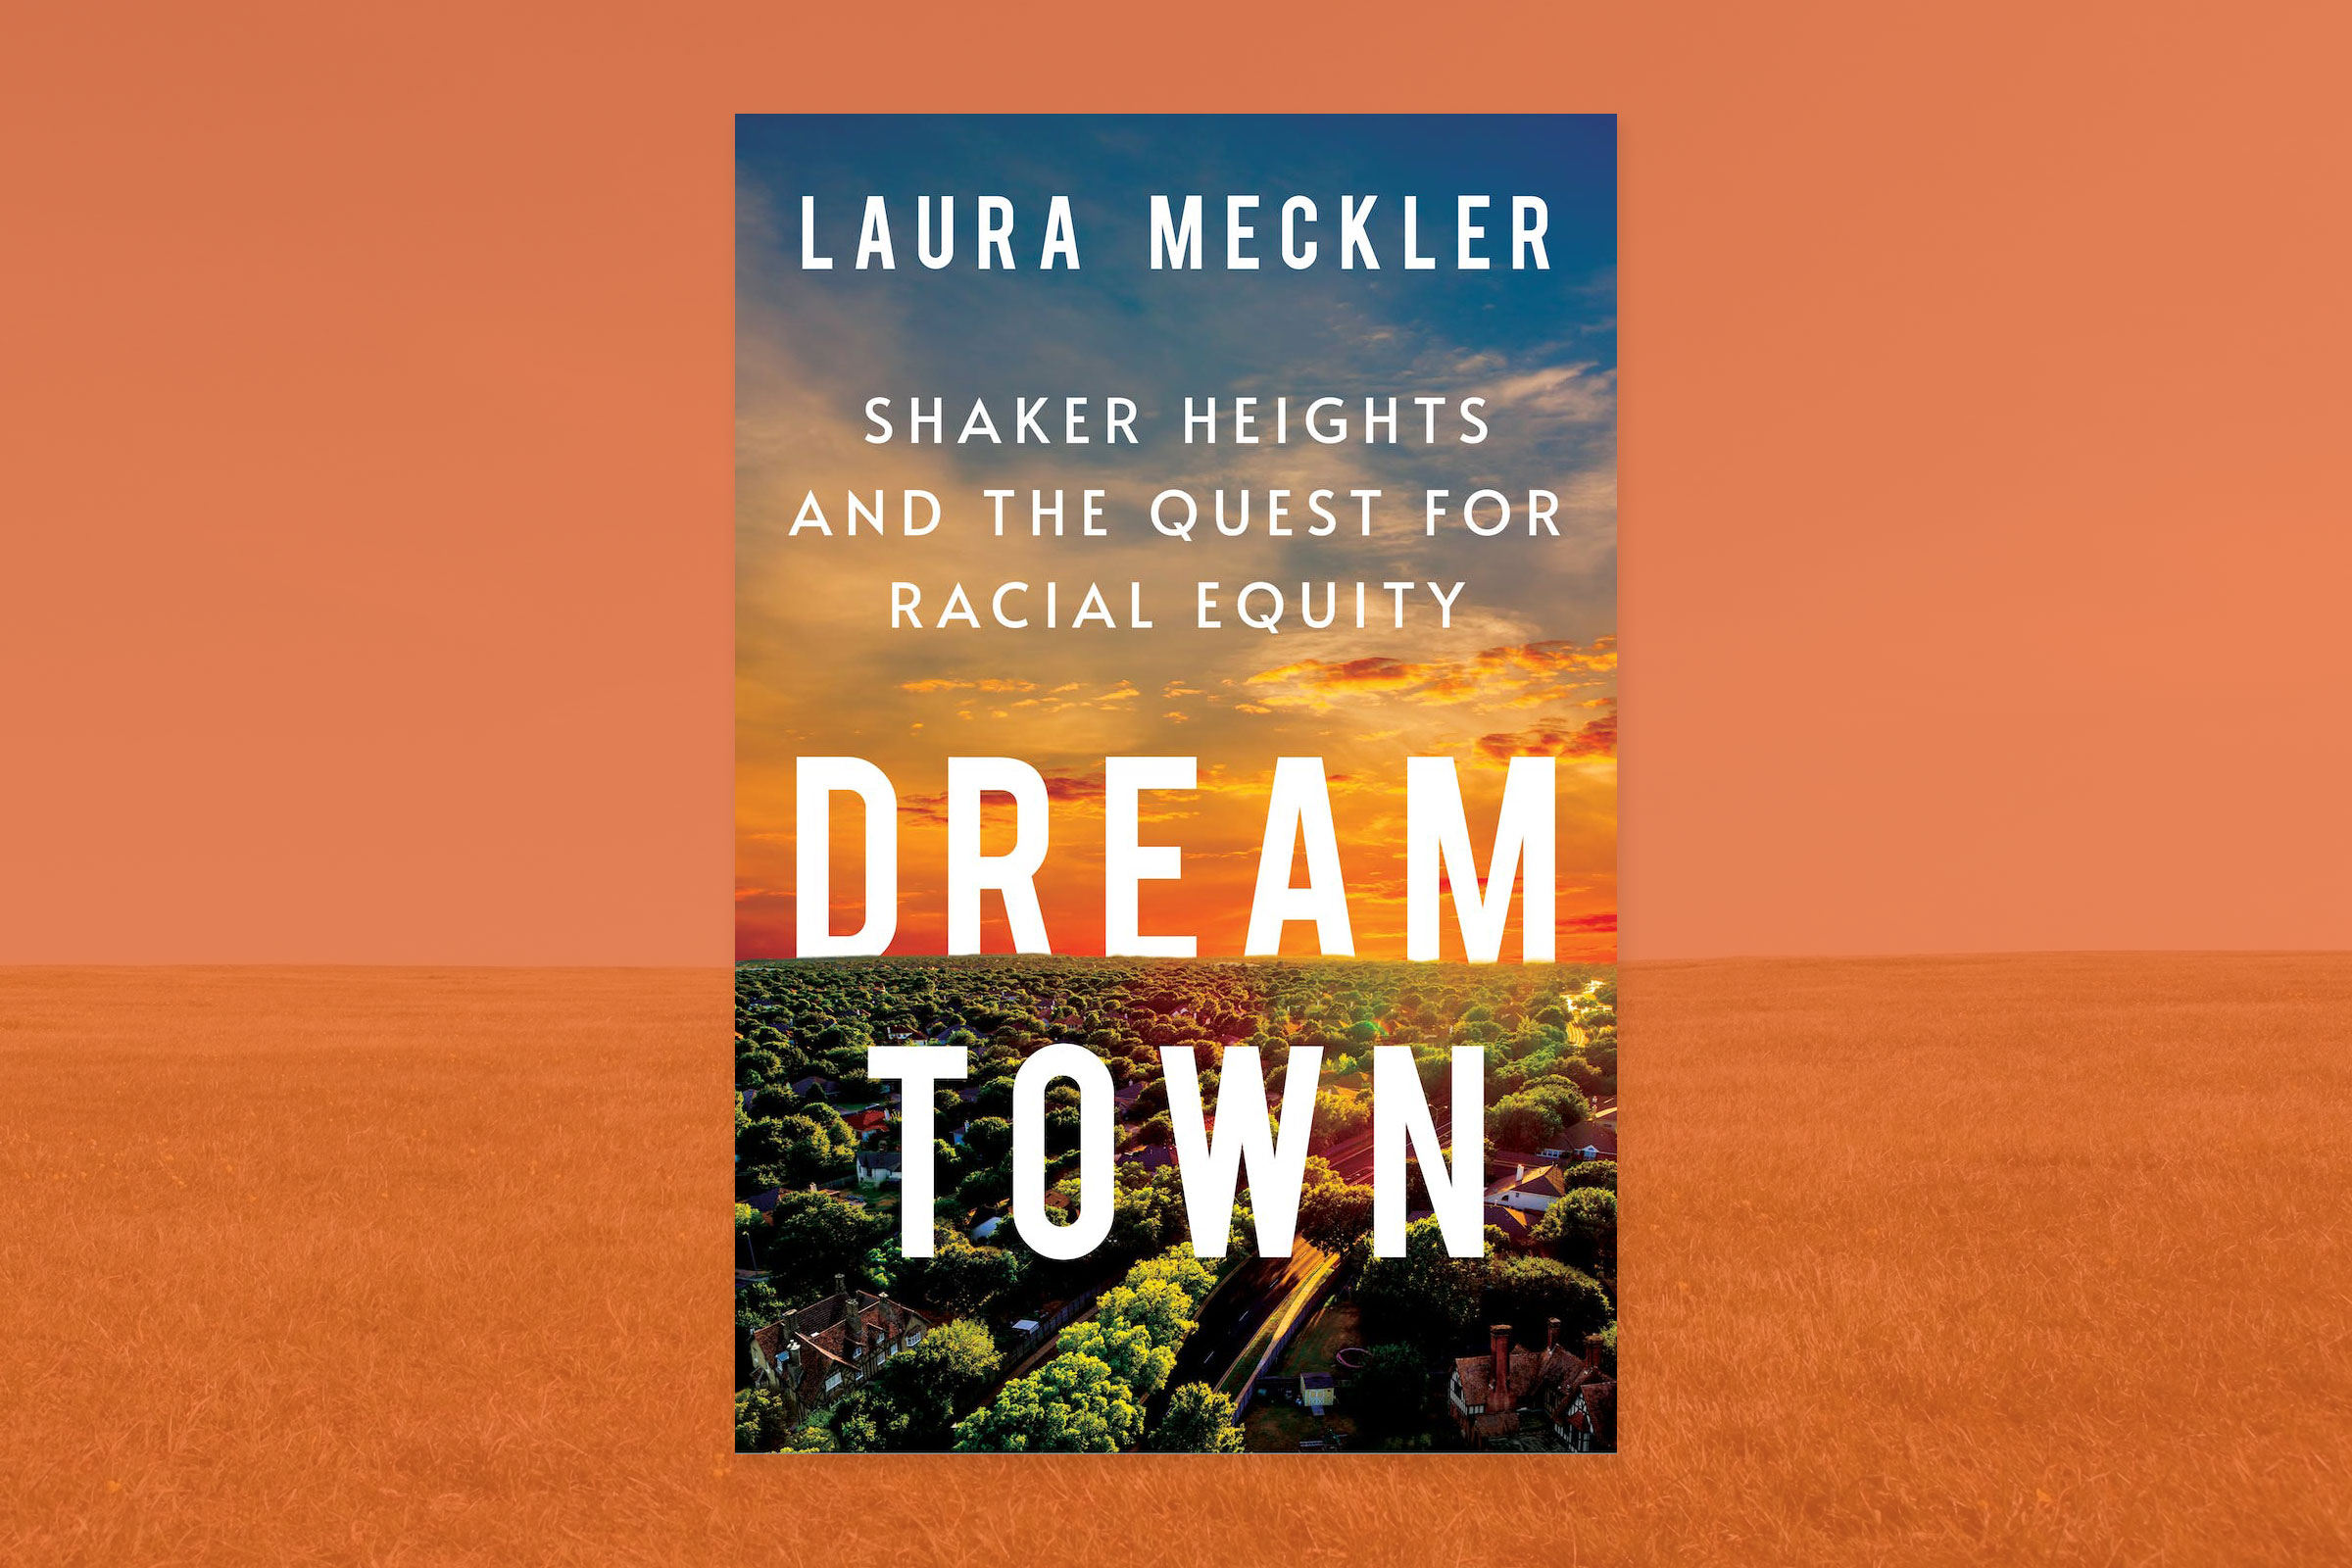 The cover for Laura Meckler's book Dream Town that shows a overhead view of a town with trees streets and houses with an orange sunset behind it